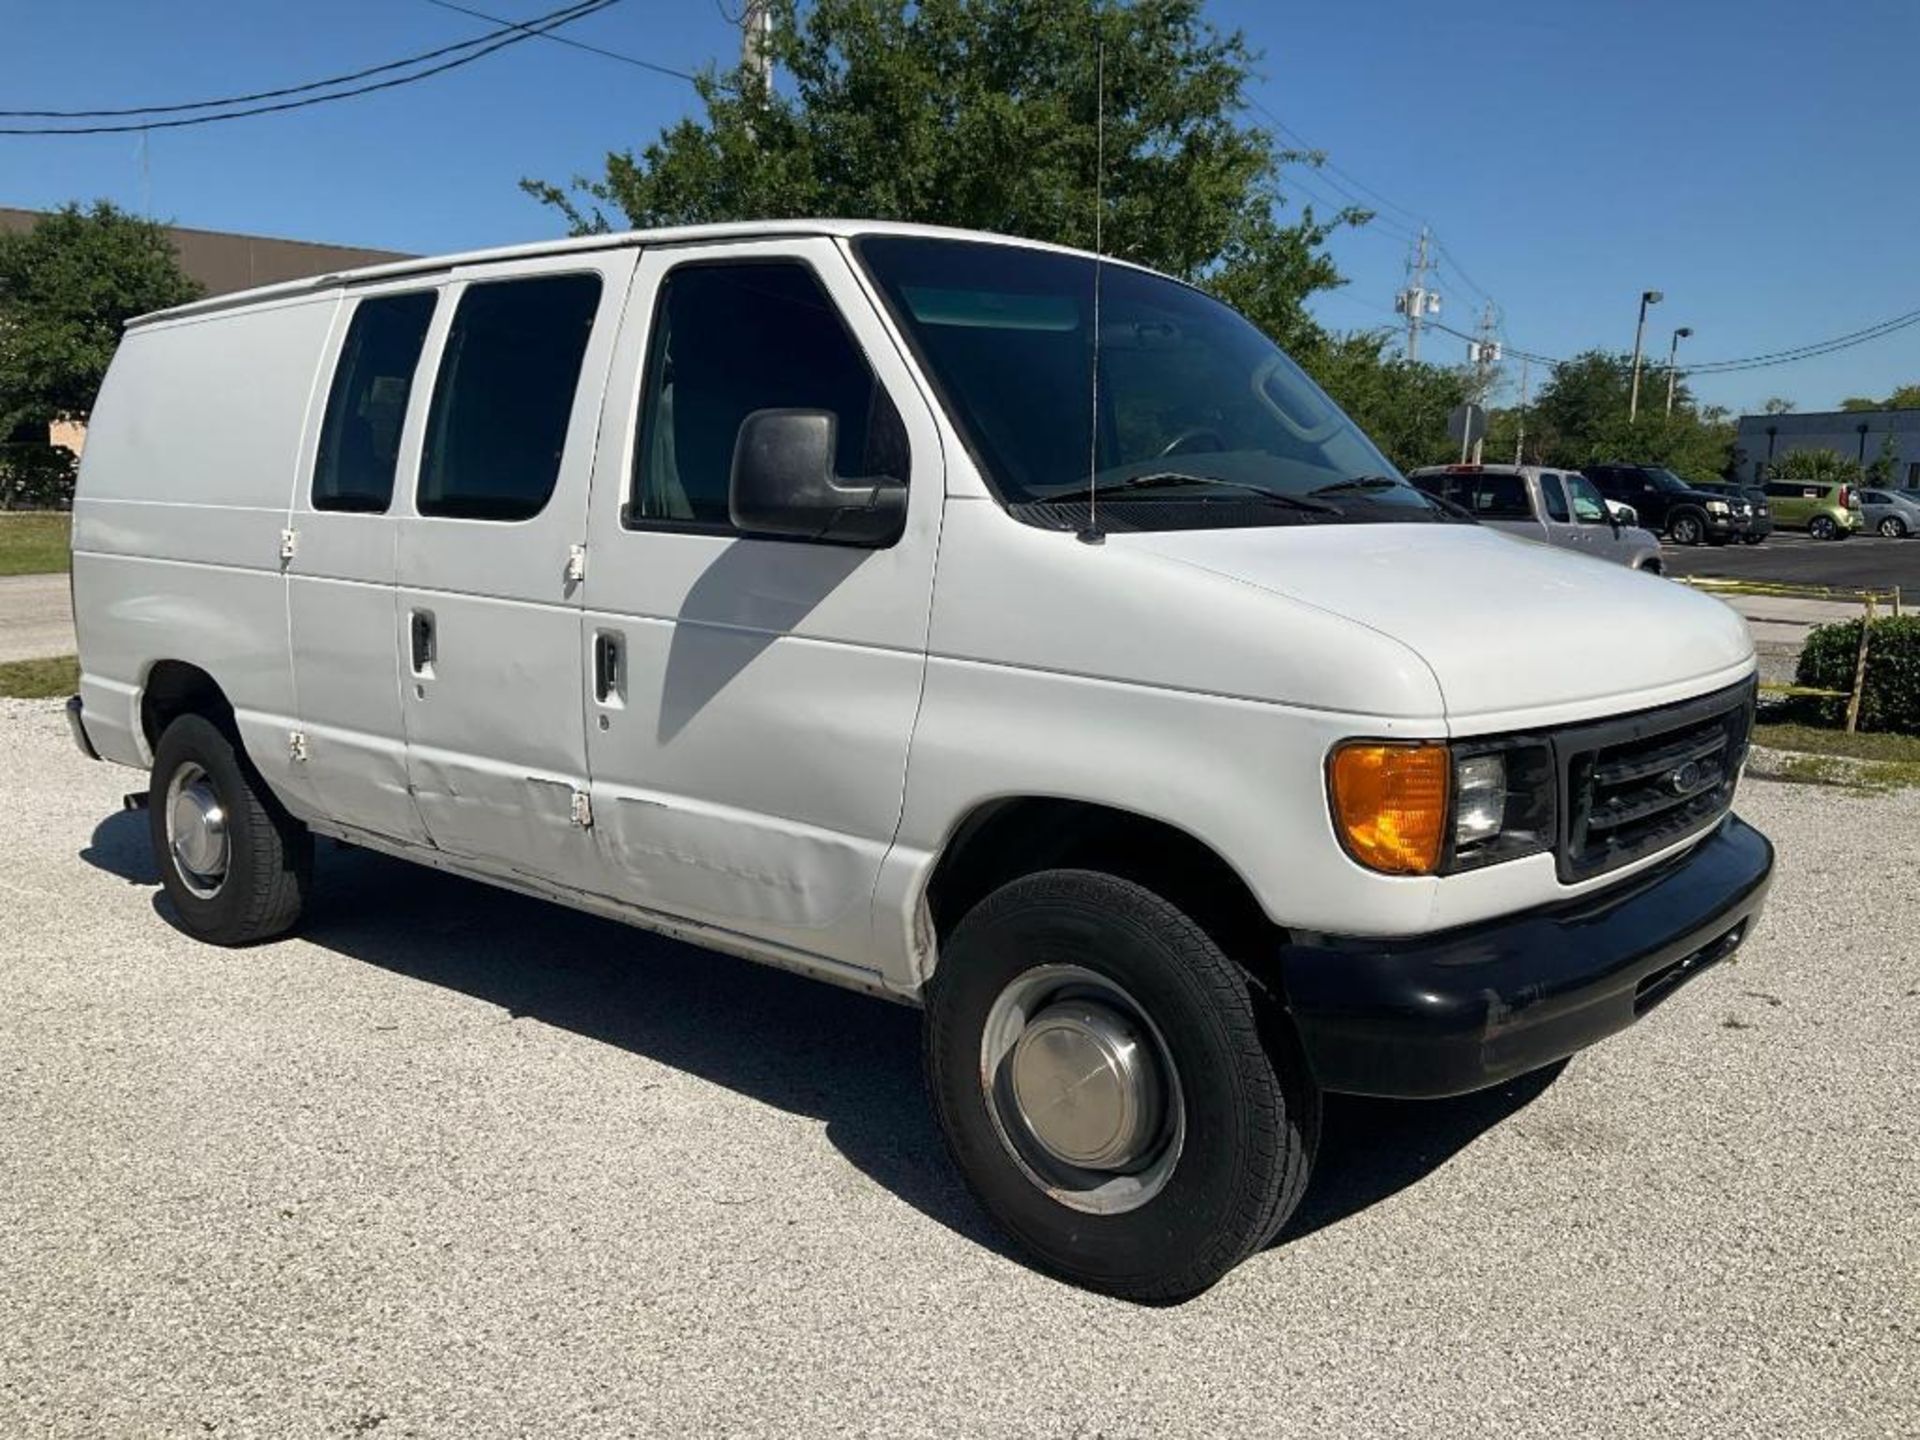 2003 FORD E-SERIES CARGO VAN, APPROX GVWR 8600LBS, STORAGE UNIT & SHELVES IN BACK , RUNS & DRIVES - Image 12 of 28